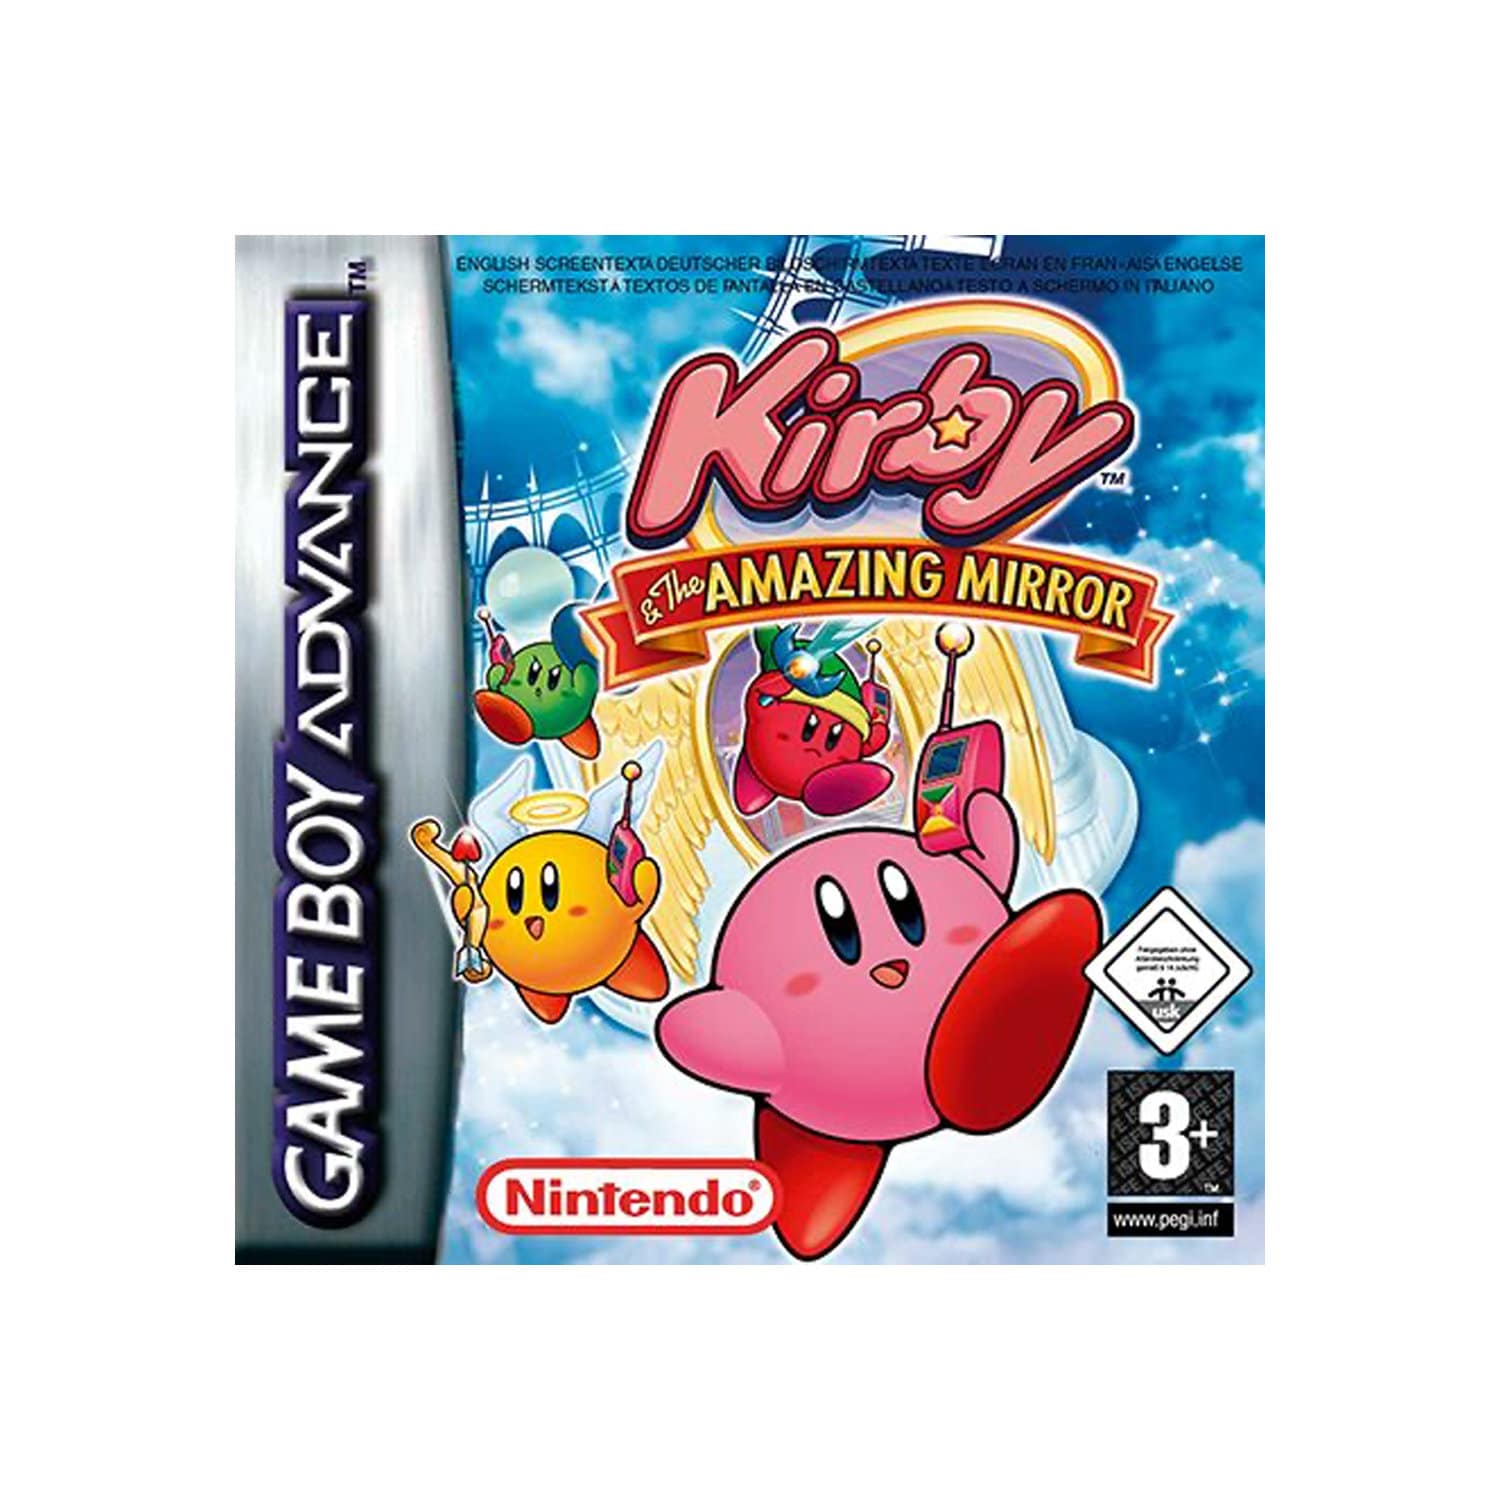 GBA Game Kirby: Amazing Mirror Gameboy Advance Cartridge Repro - Etsy